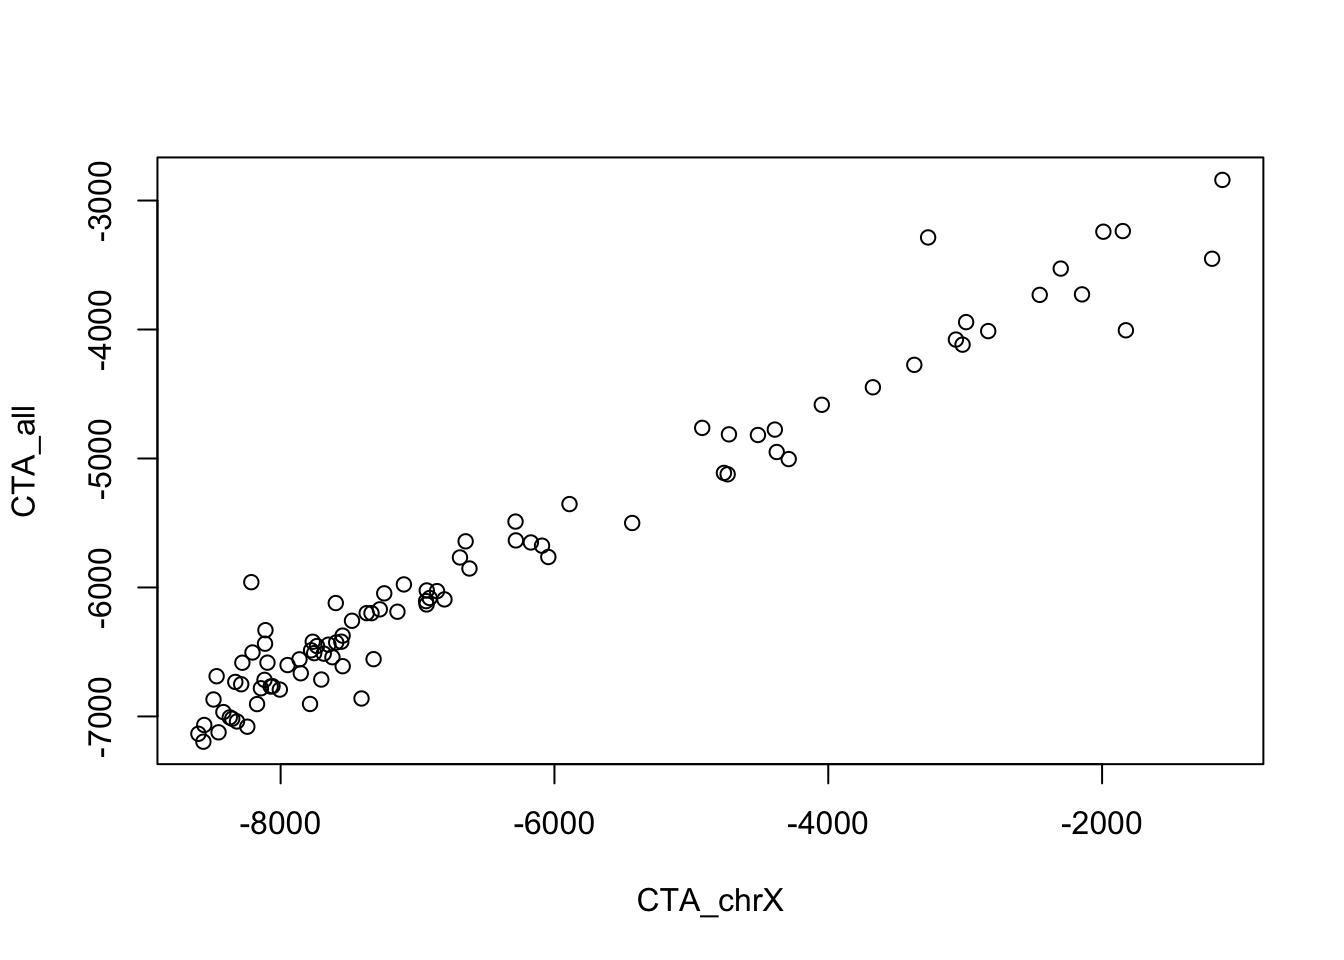 Scatterplot of single sample GSEA scores showing very high correlation between the two